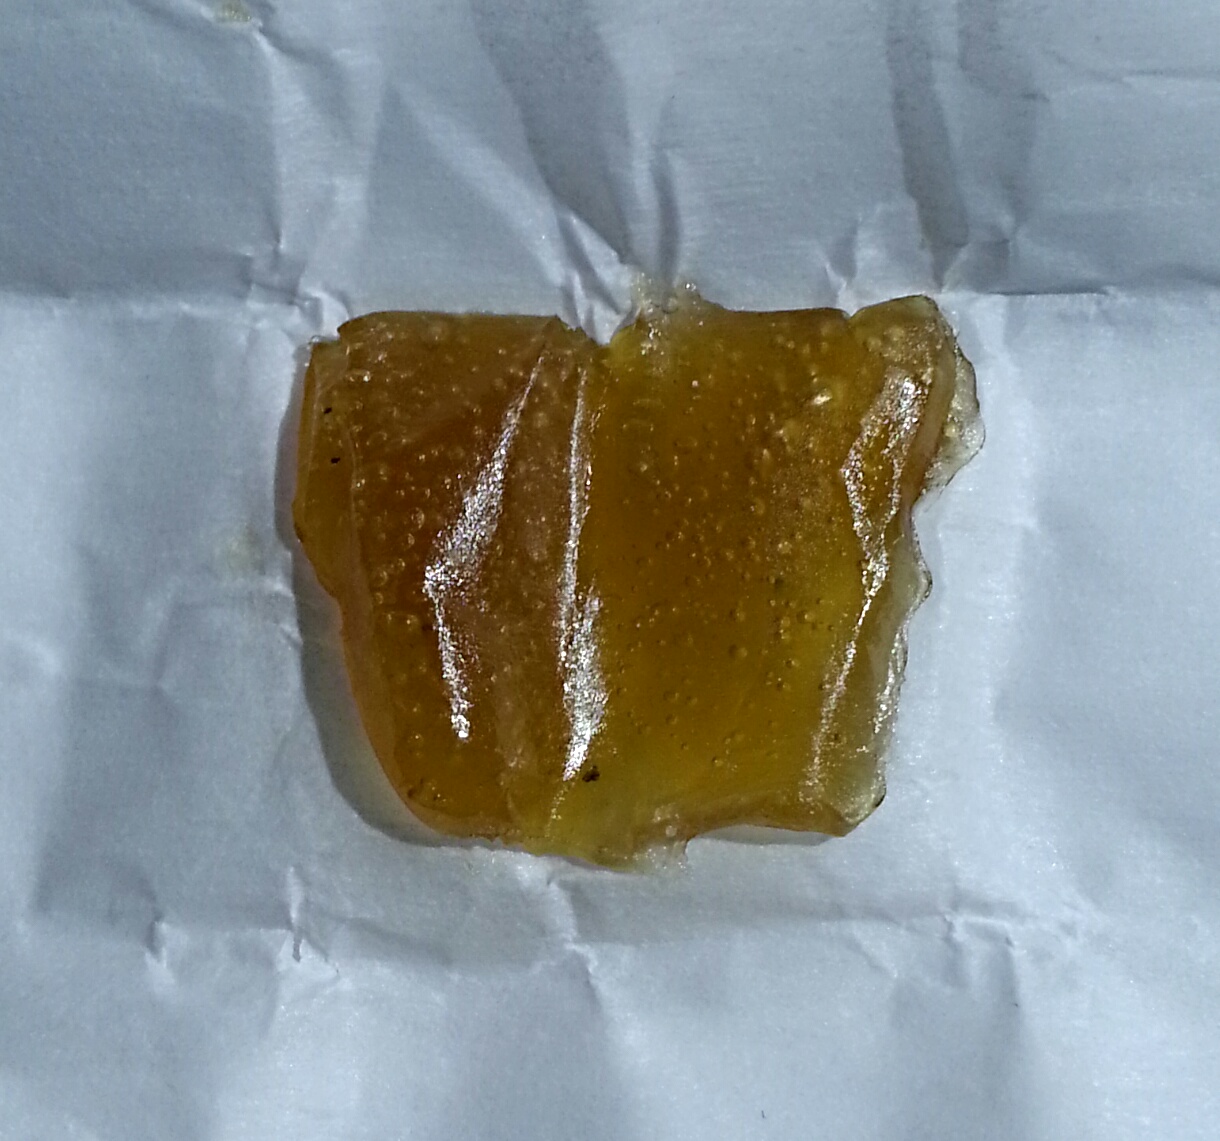 Blue Diamond nectar from Second Story Concentrate Review